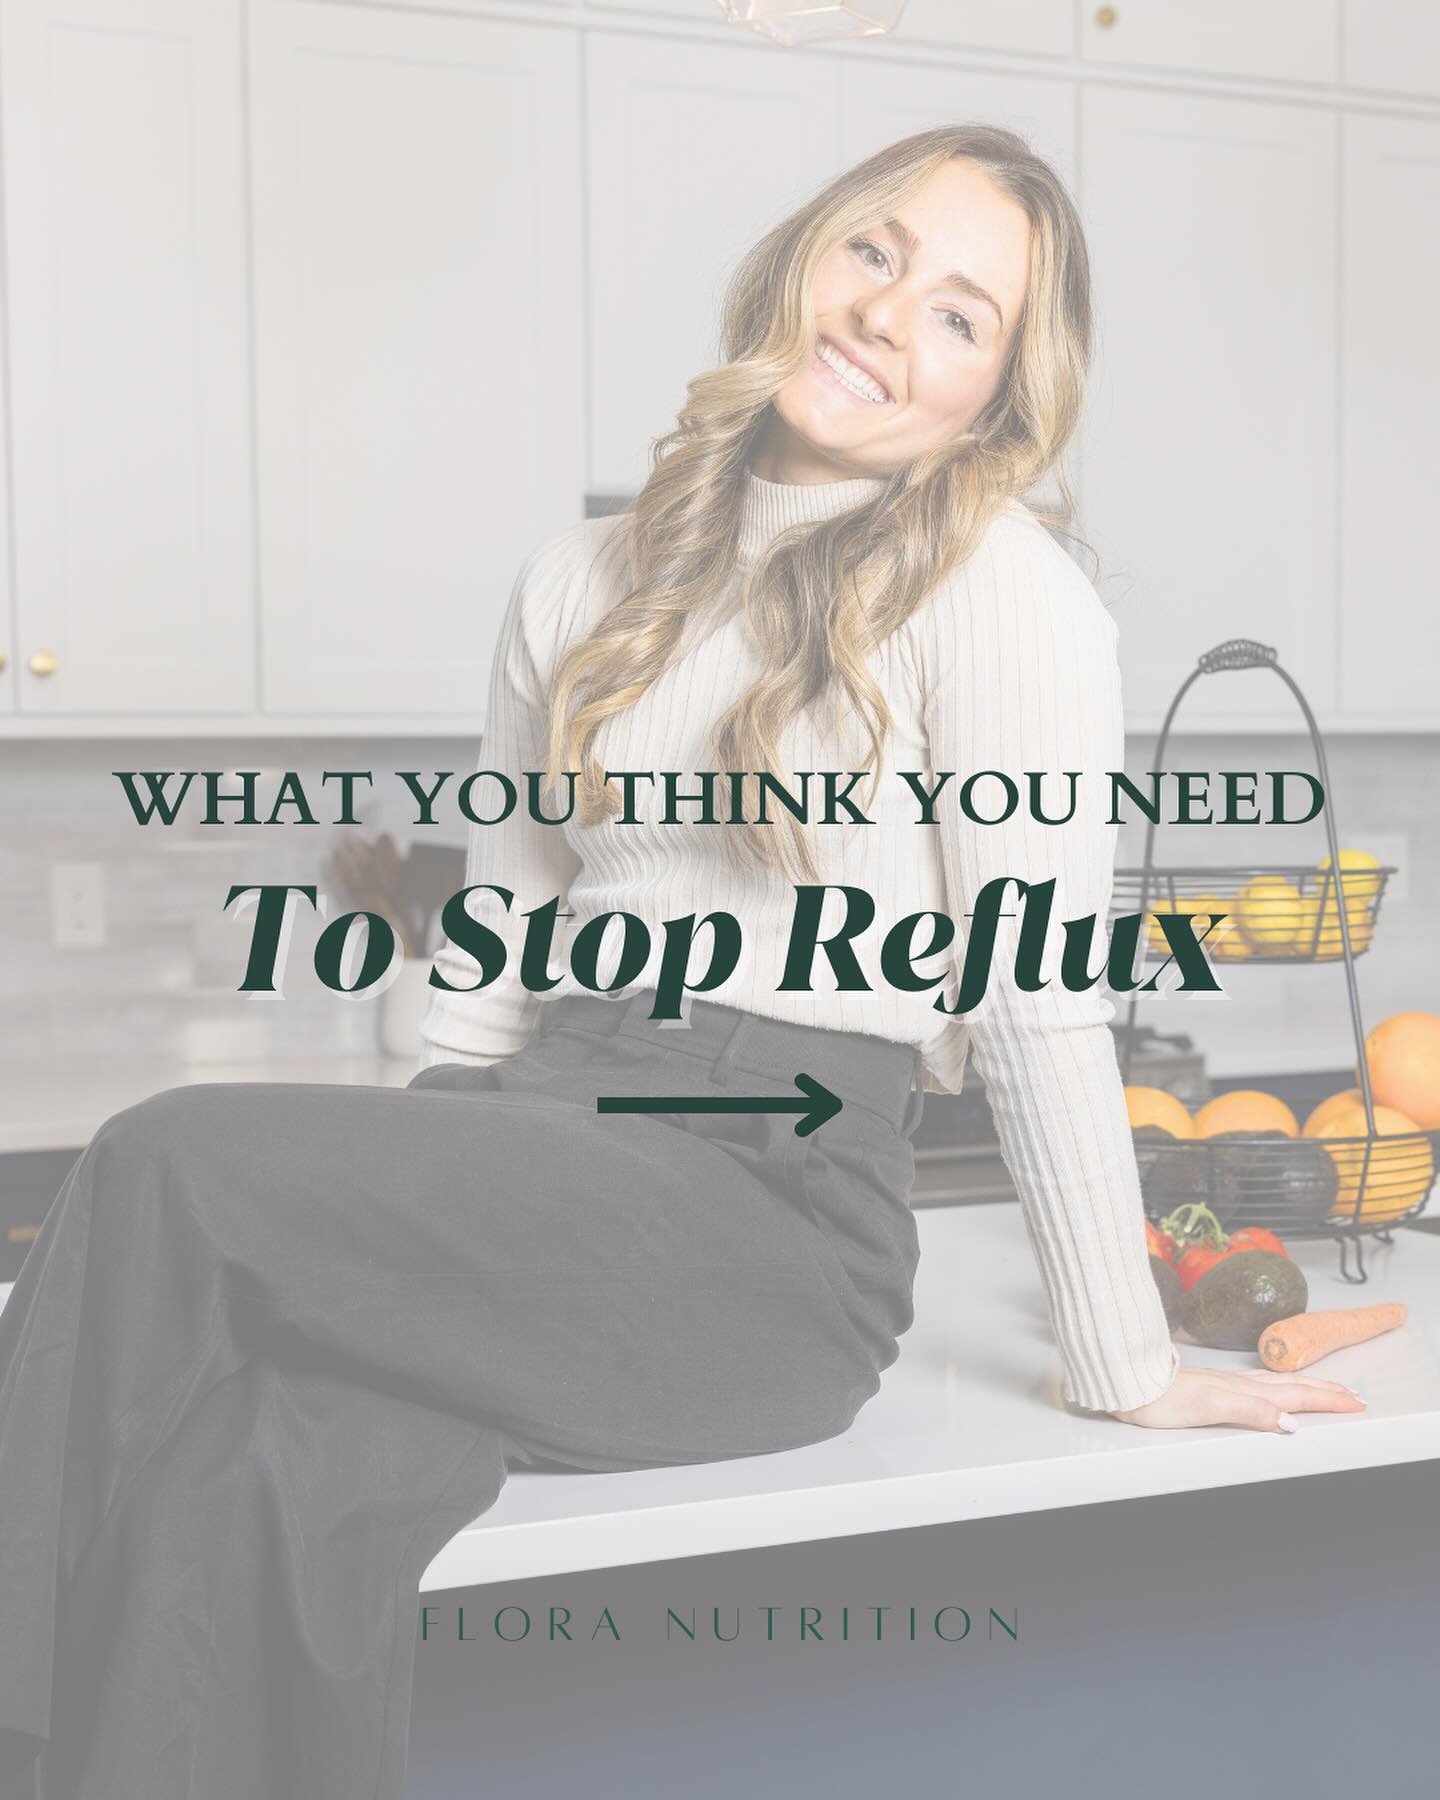 For the longest time, I thought that the &ldquo;cure&rdquo; to my reflux disease was going to be found in a supplement or some sort of elimination diet. 

It wasn&rsquo;t until I utilized a holistic approach that focused on total body health and addr